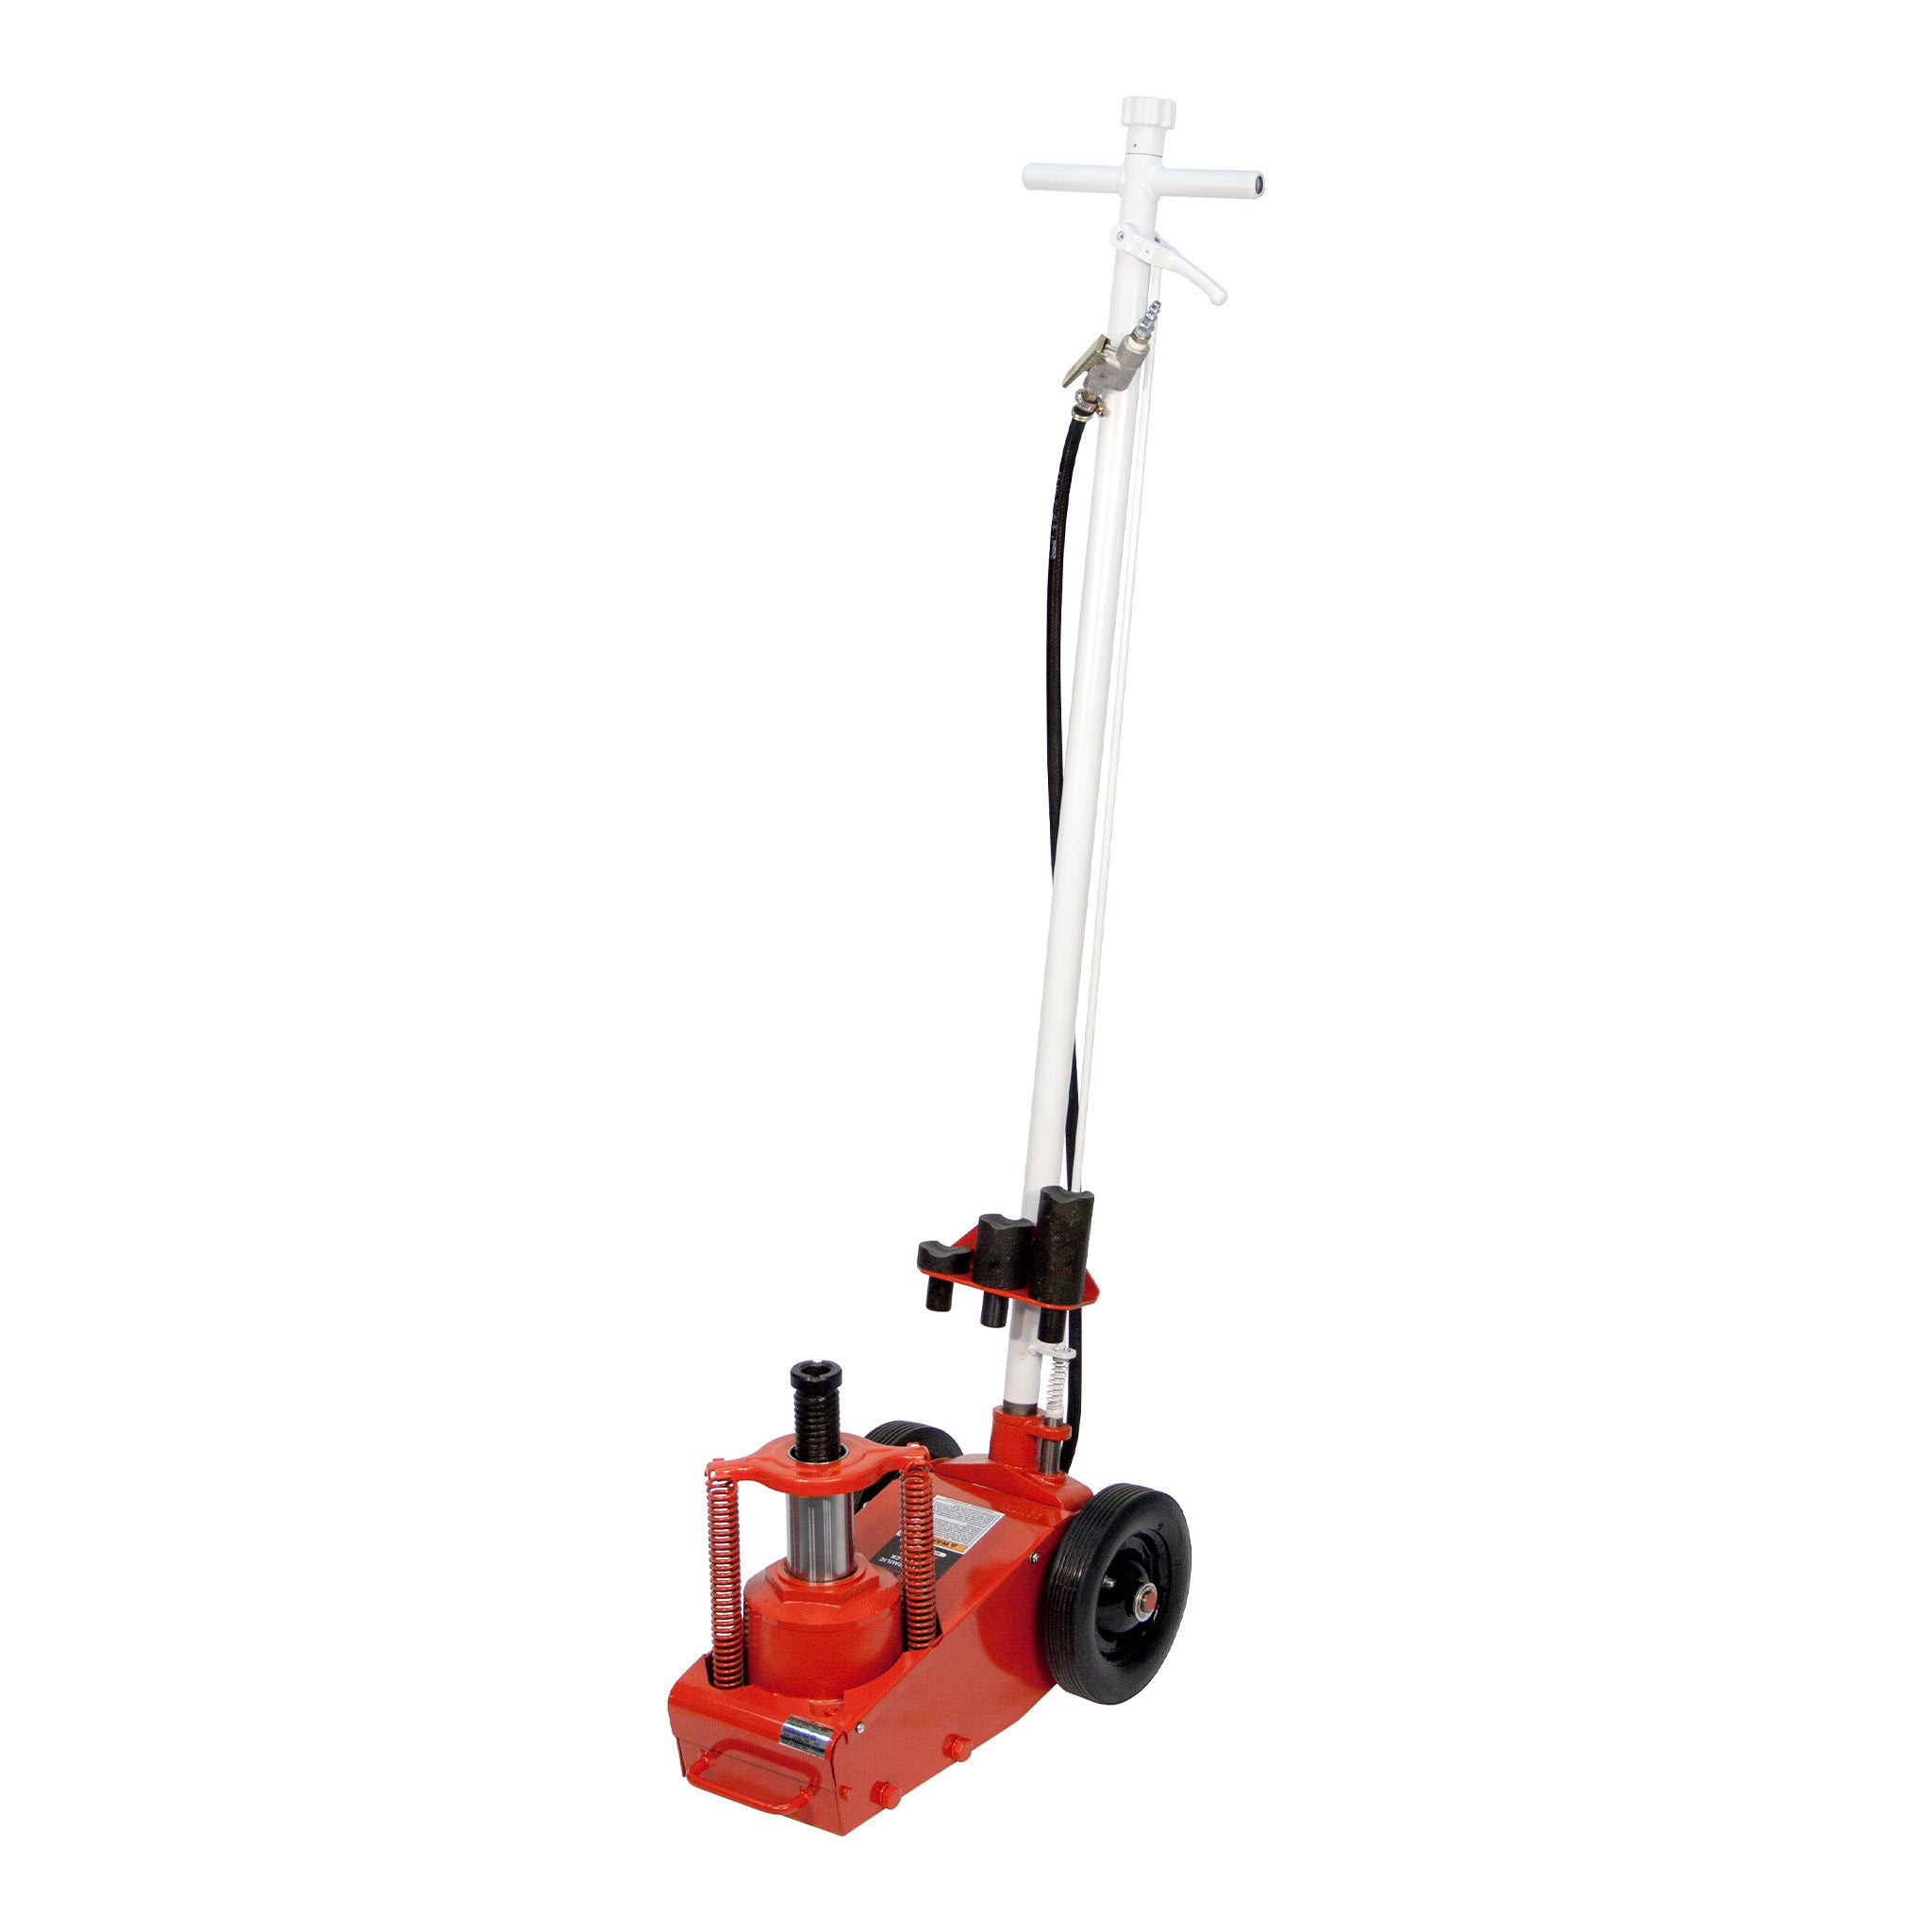 Norco 22 Ton Air/Hyd. Floor Jack w/ 2 Adapters plus Holder